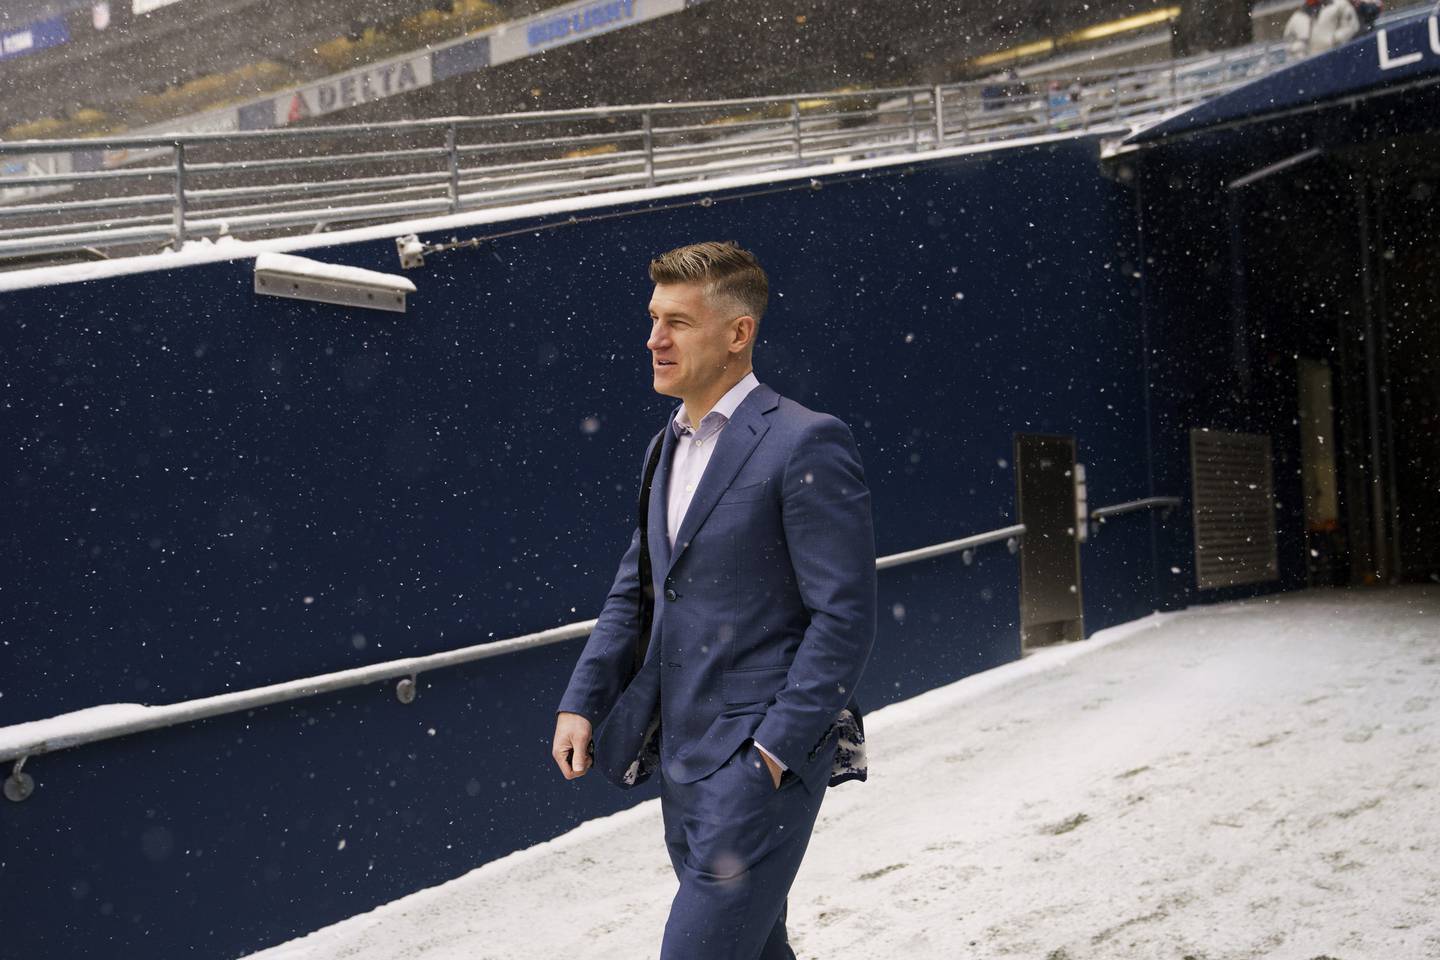 Bears general manager Ryan Pace walks on the field before a game against the Seahawks on Dec. 26, 2021, at Lumen Field in Seattle.